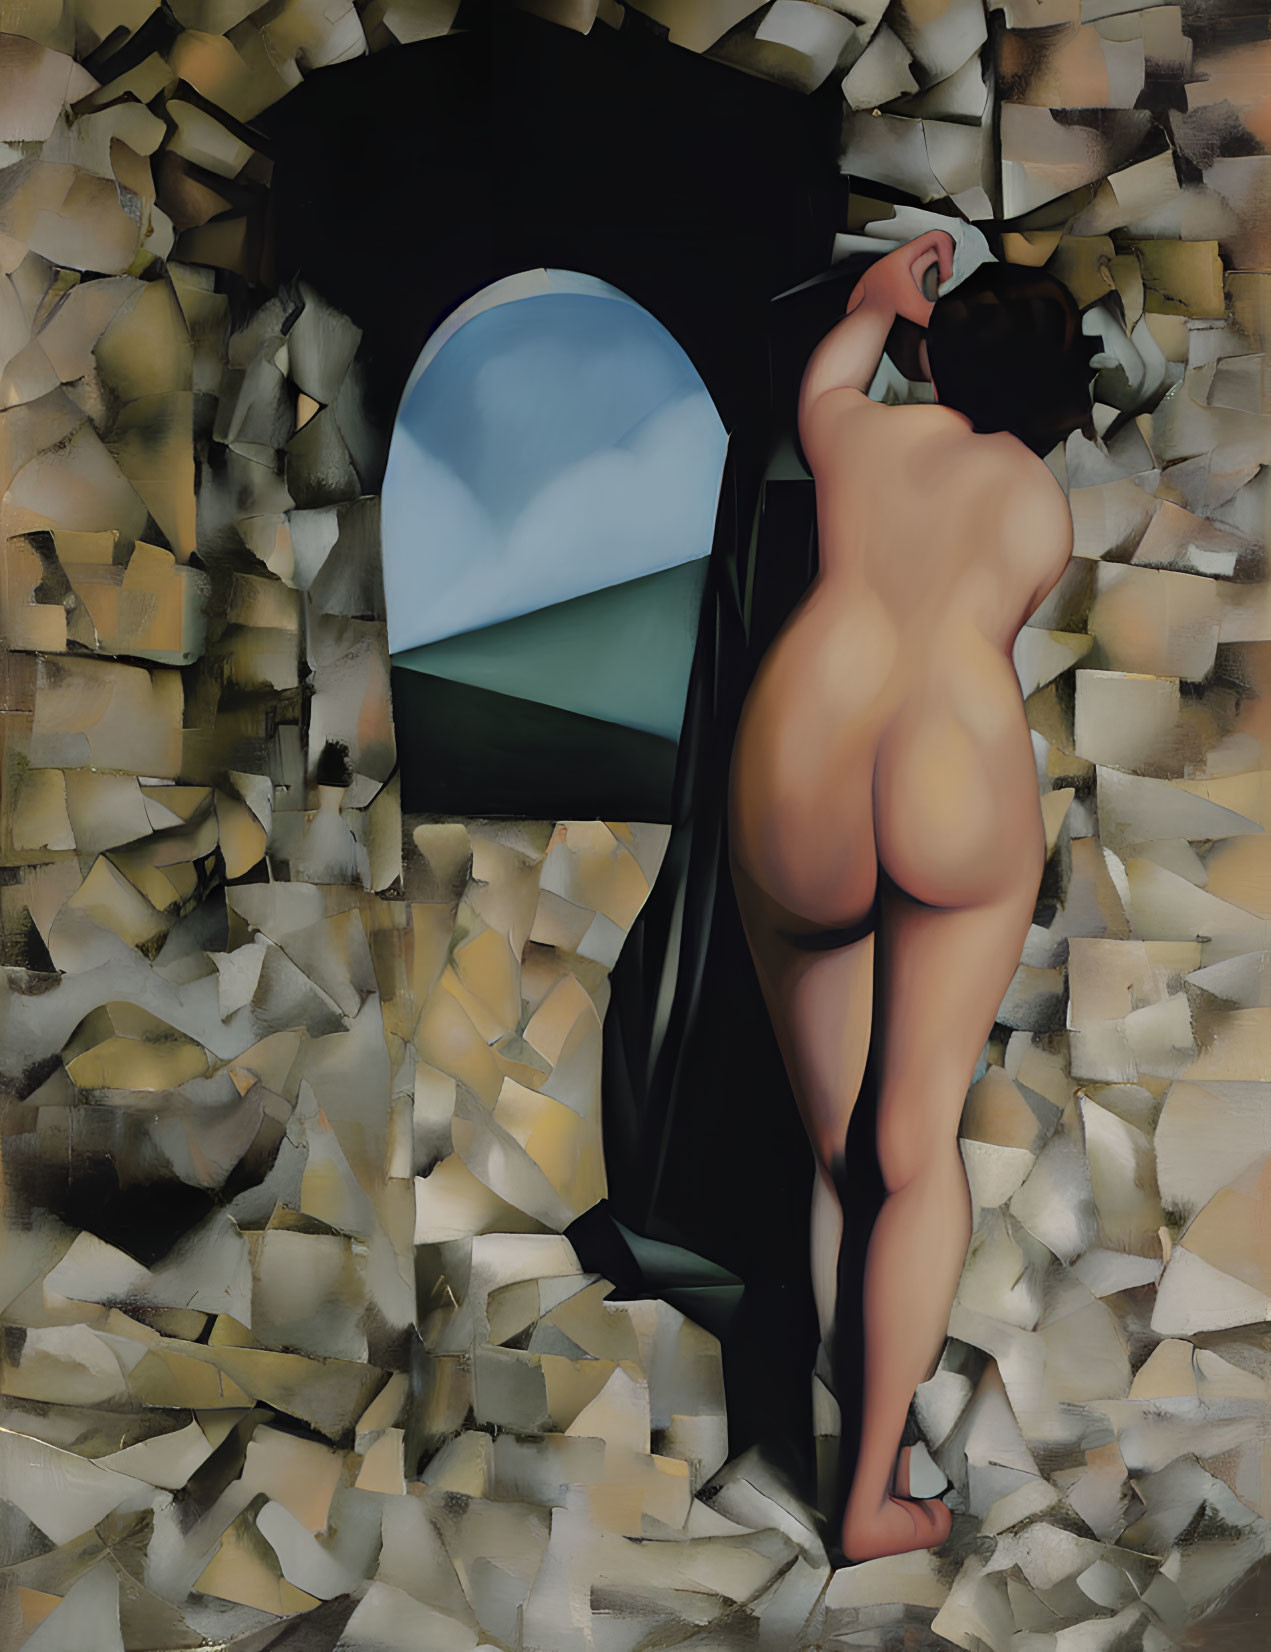 Nude Woman Looking Out Window in Cubist Style